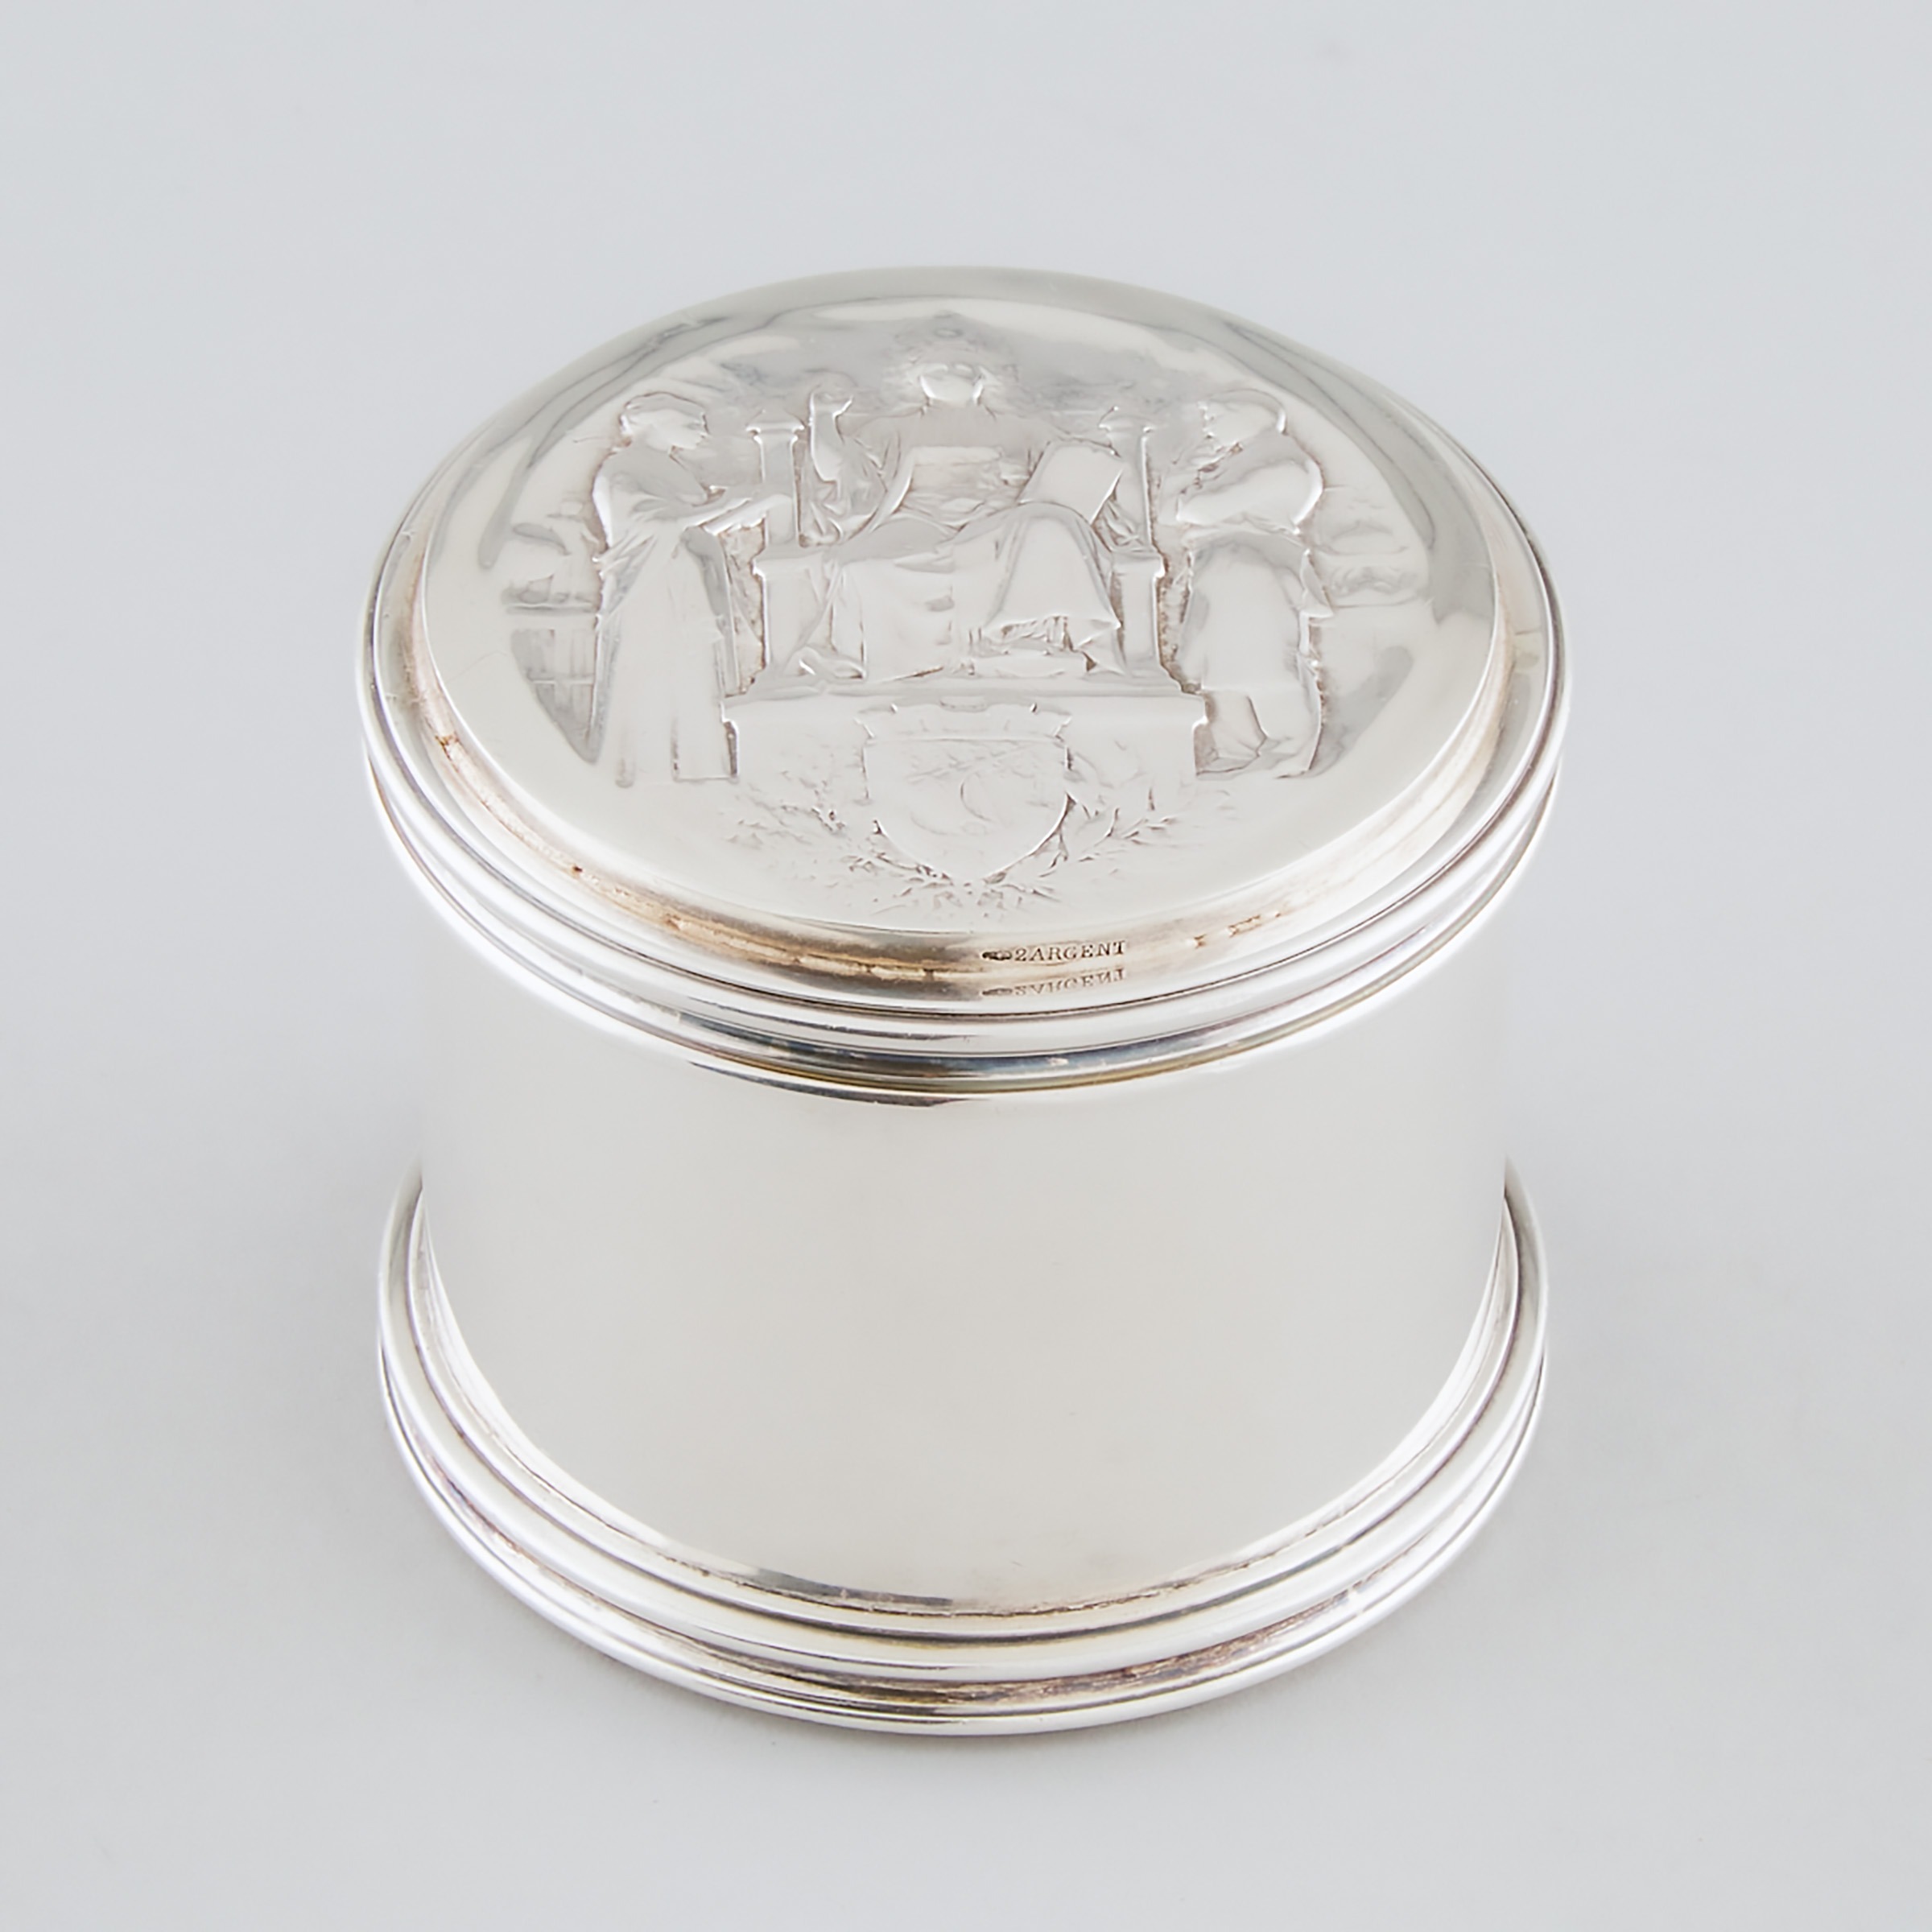 English and French Silver 'Paris'